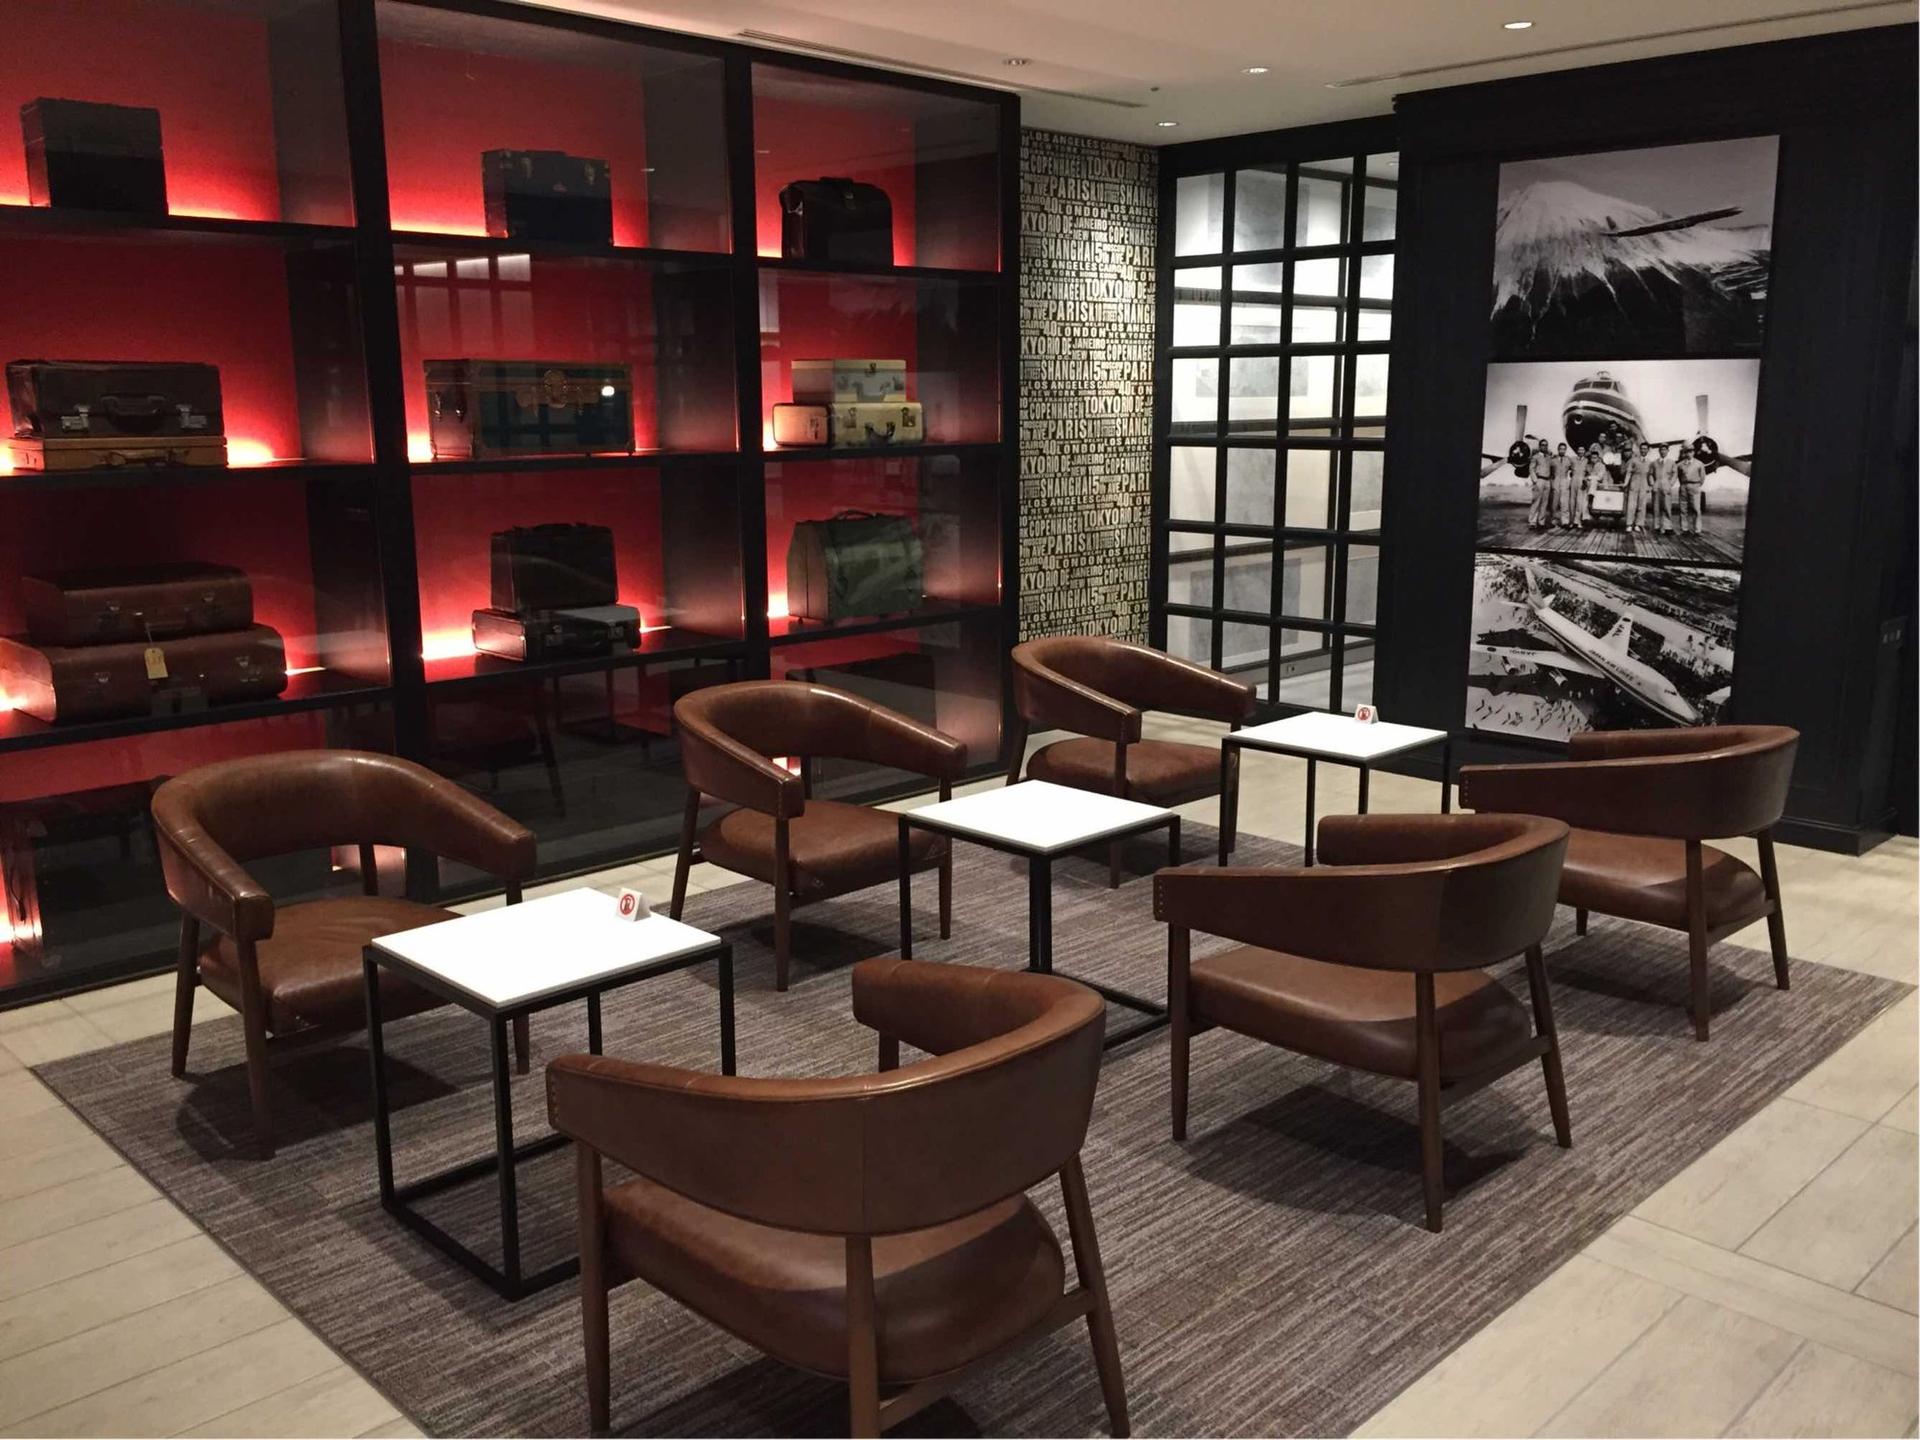 Japan Airlines JAL First Class Lounge image 12 of 43